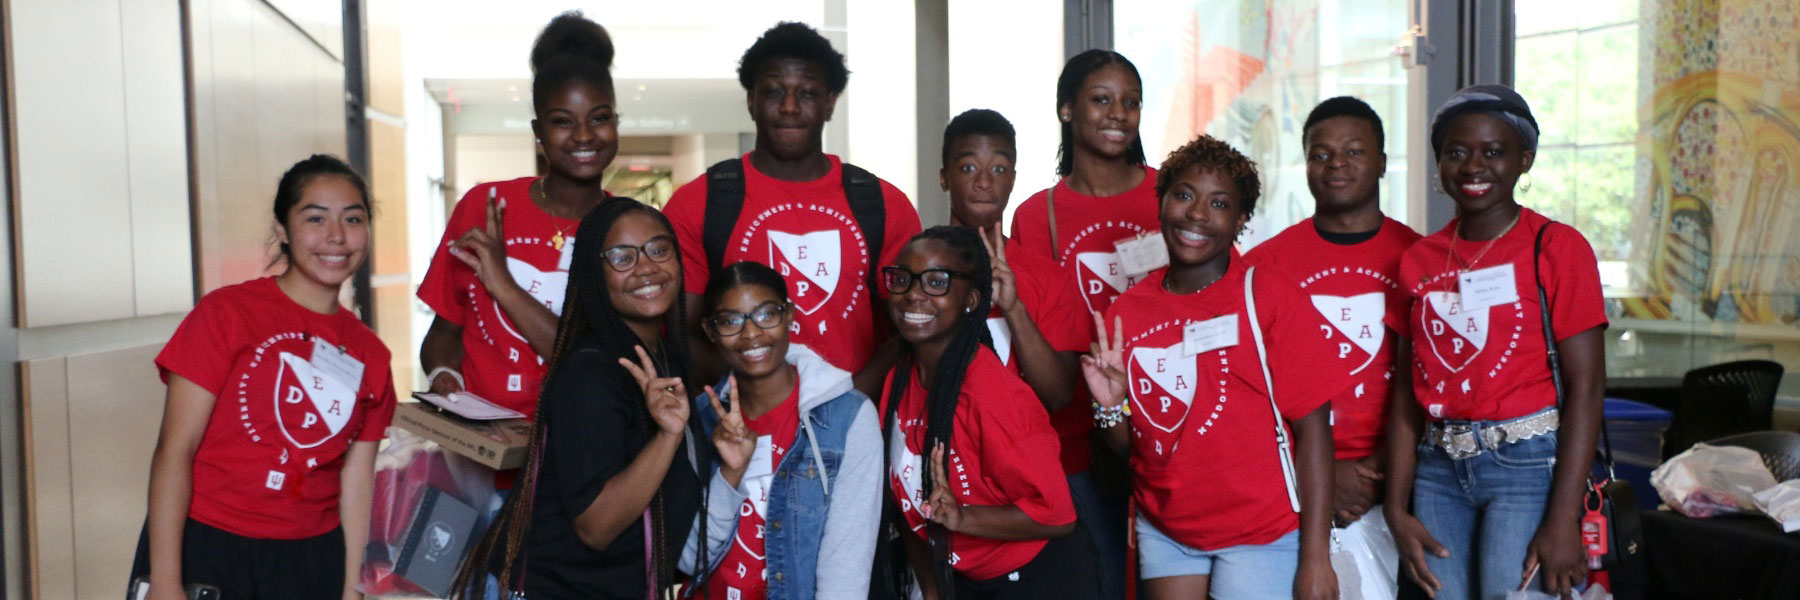 Group photo of multiple students wearing red DEAP shirts